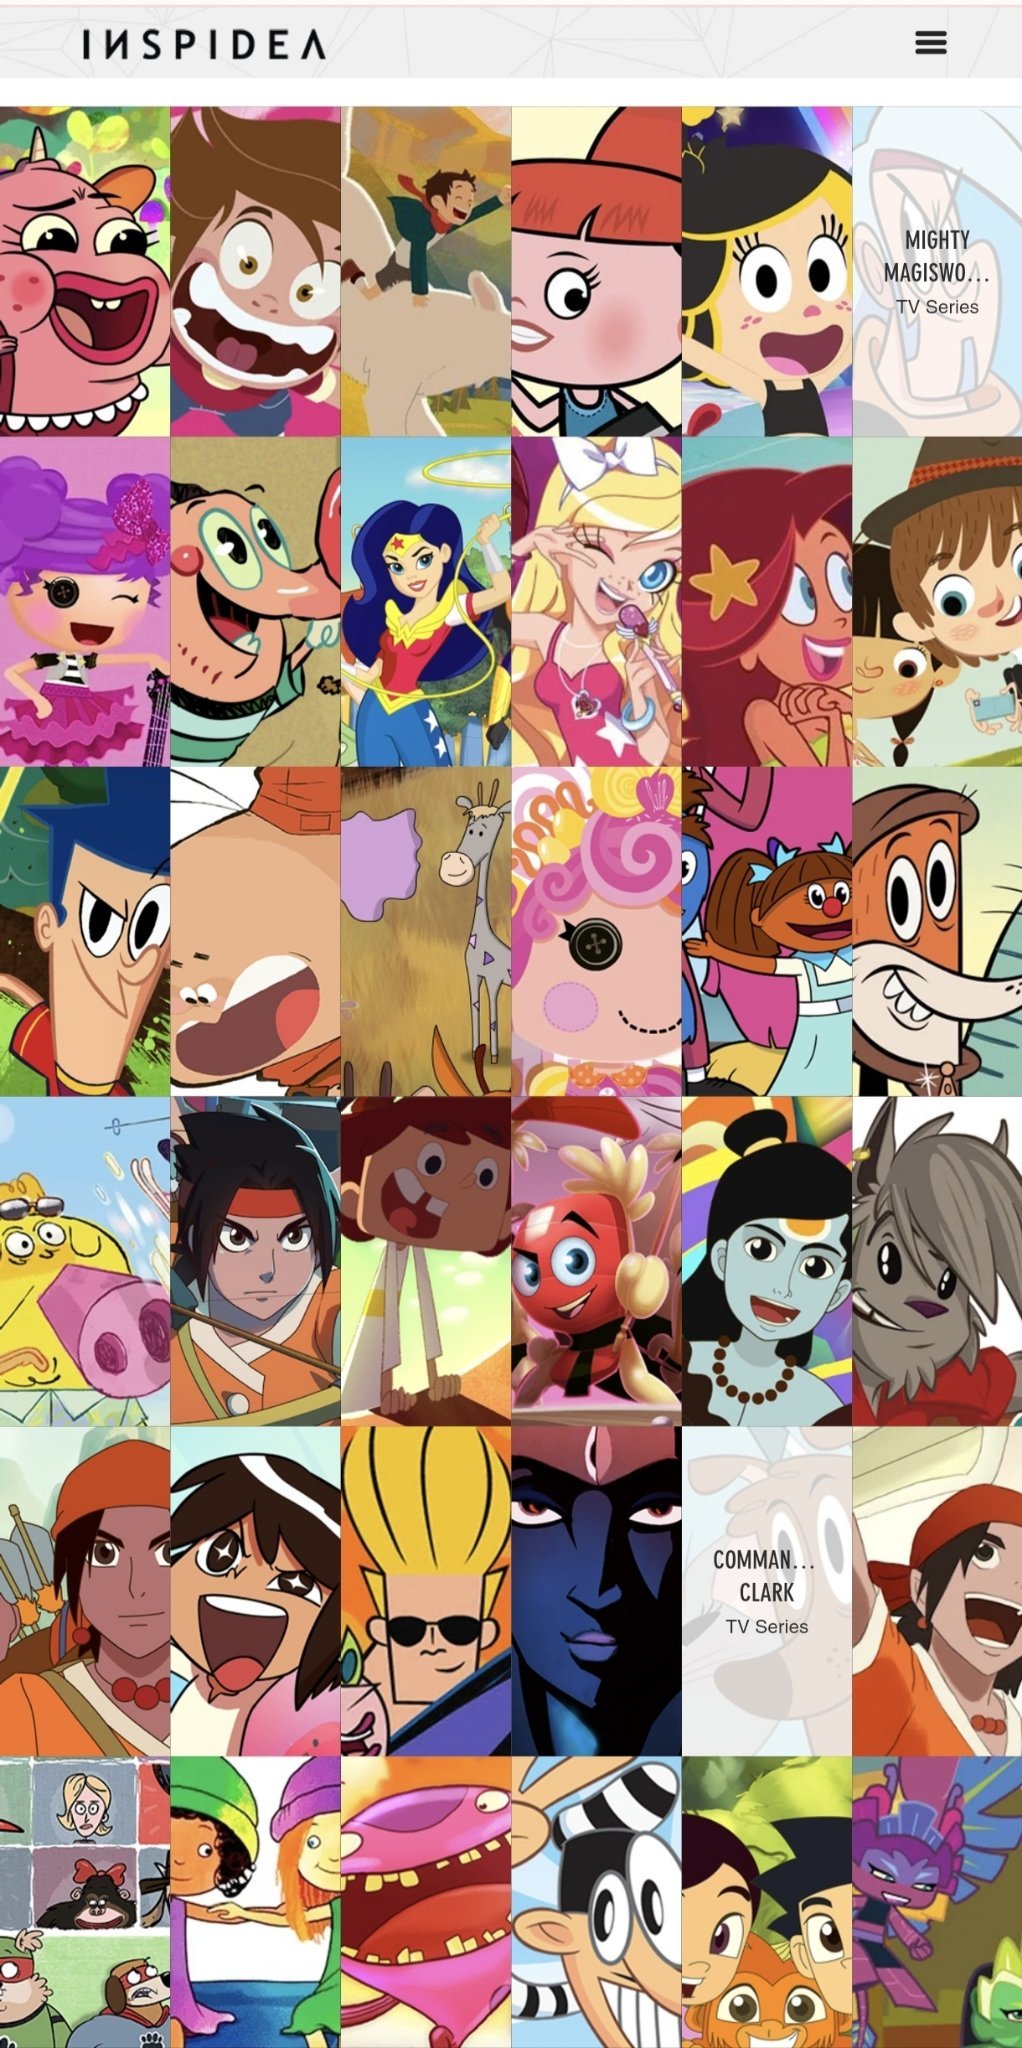 How many of these cartoons do you know?